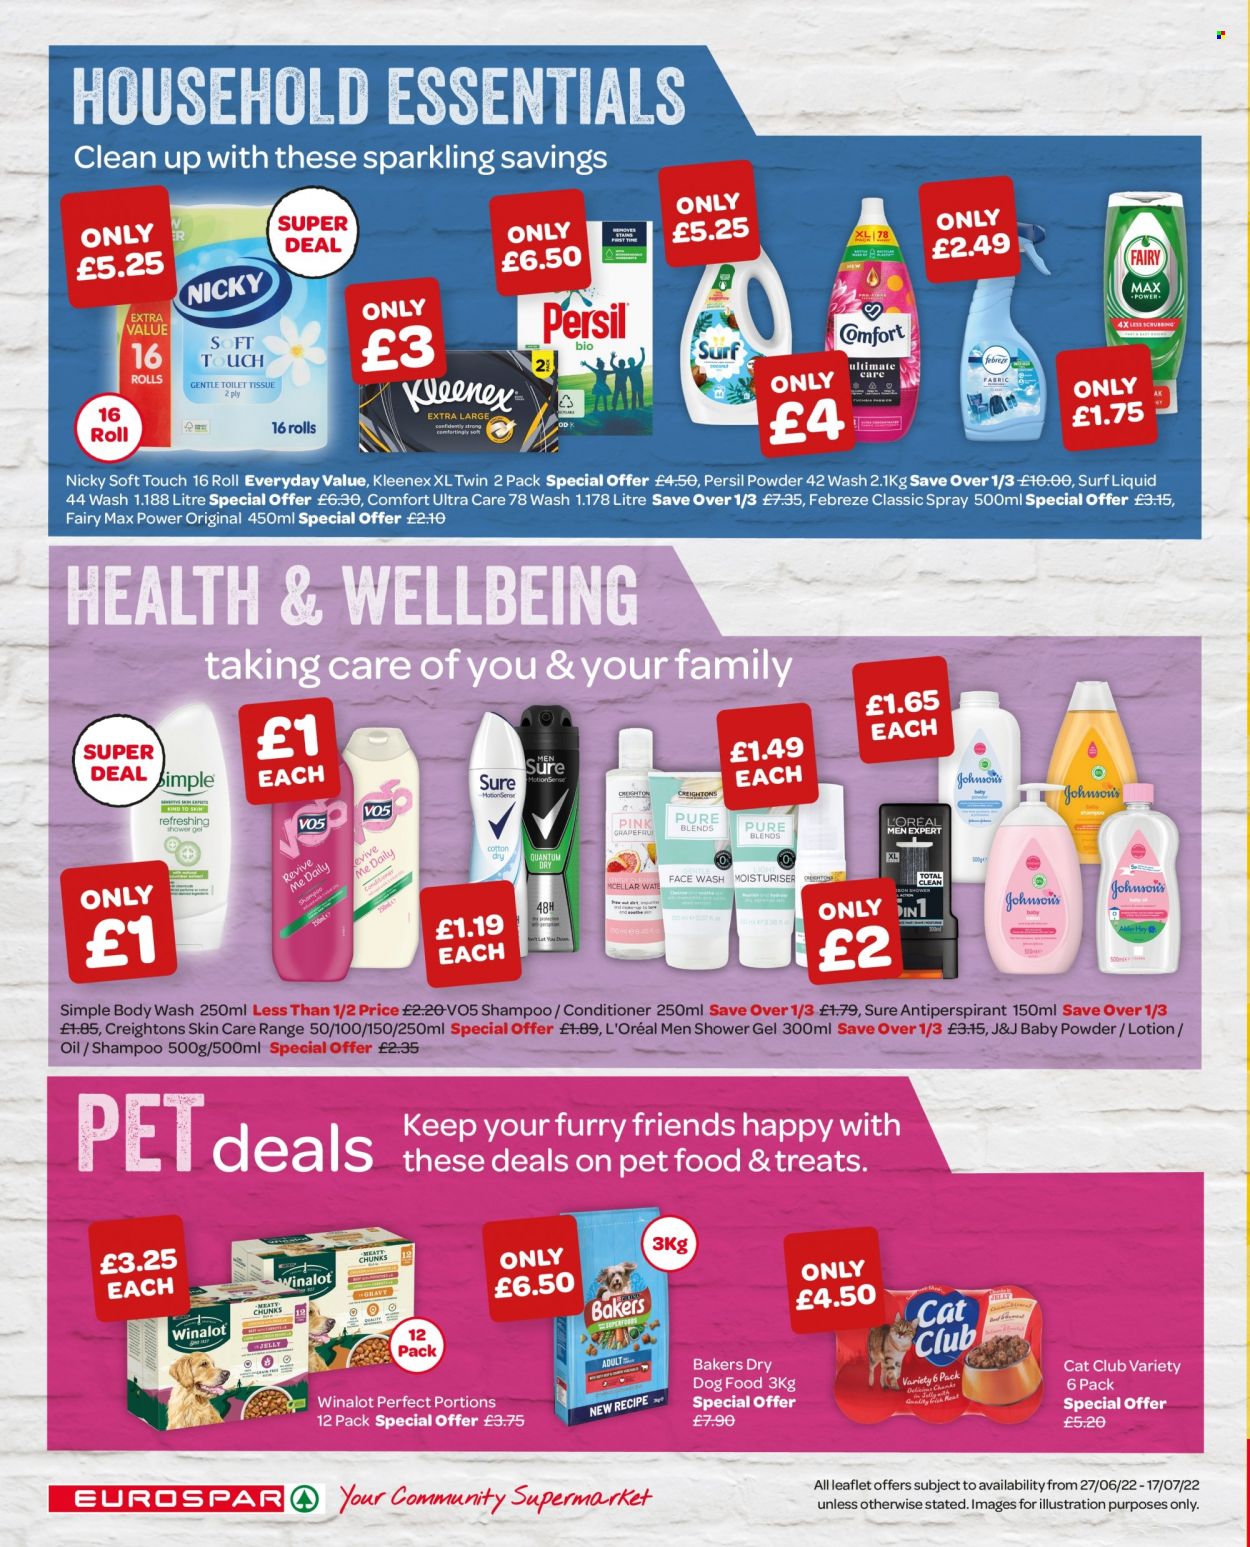 thumbnail - SPAR offer  - 27/06/2022 - 17/07/2022 - Sales products - pineapple, pears, cake, brownies, sausage, Oreo, Müller, Yoplait, Ben & Jerry's, fudge, chocolate, Snickers, Twix, Bounty, Mars, Cadbury, toffee, Kellogg's, Tayto, rice, caramel, oil, Pepsi, Pepsi Max, 7UP, Club Zero, smoothie, baby powder, Kleenex, Rex, Febreze, Fairy, Persil, Surf, body wash, shampoo, shower gel, L’Oréal, L’Oréal Men, conditioner, VO5, body lotion, anti-perspirant, Sure, animal food, dog food, Winalot, Bakers, dry dog food. Page 5.